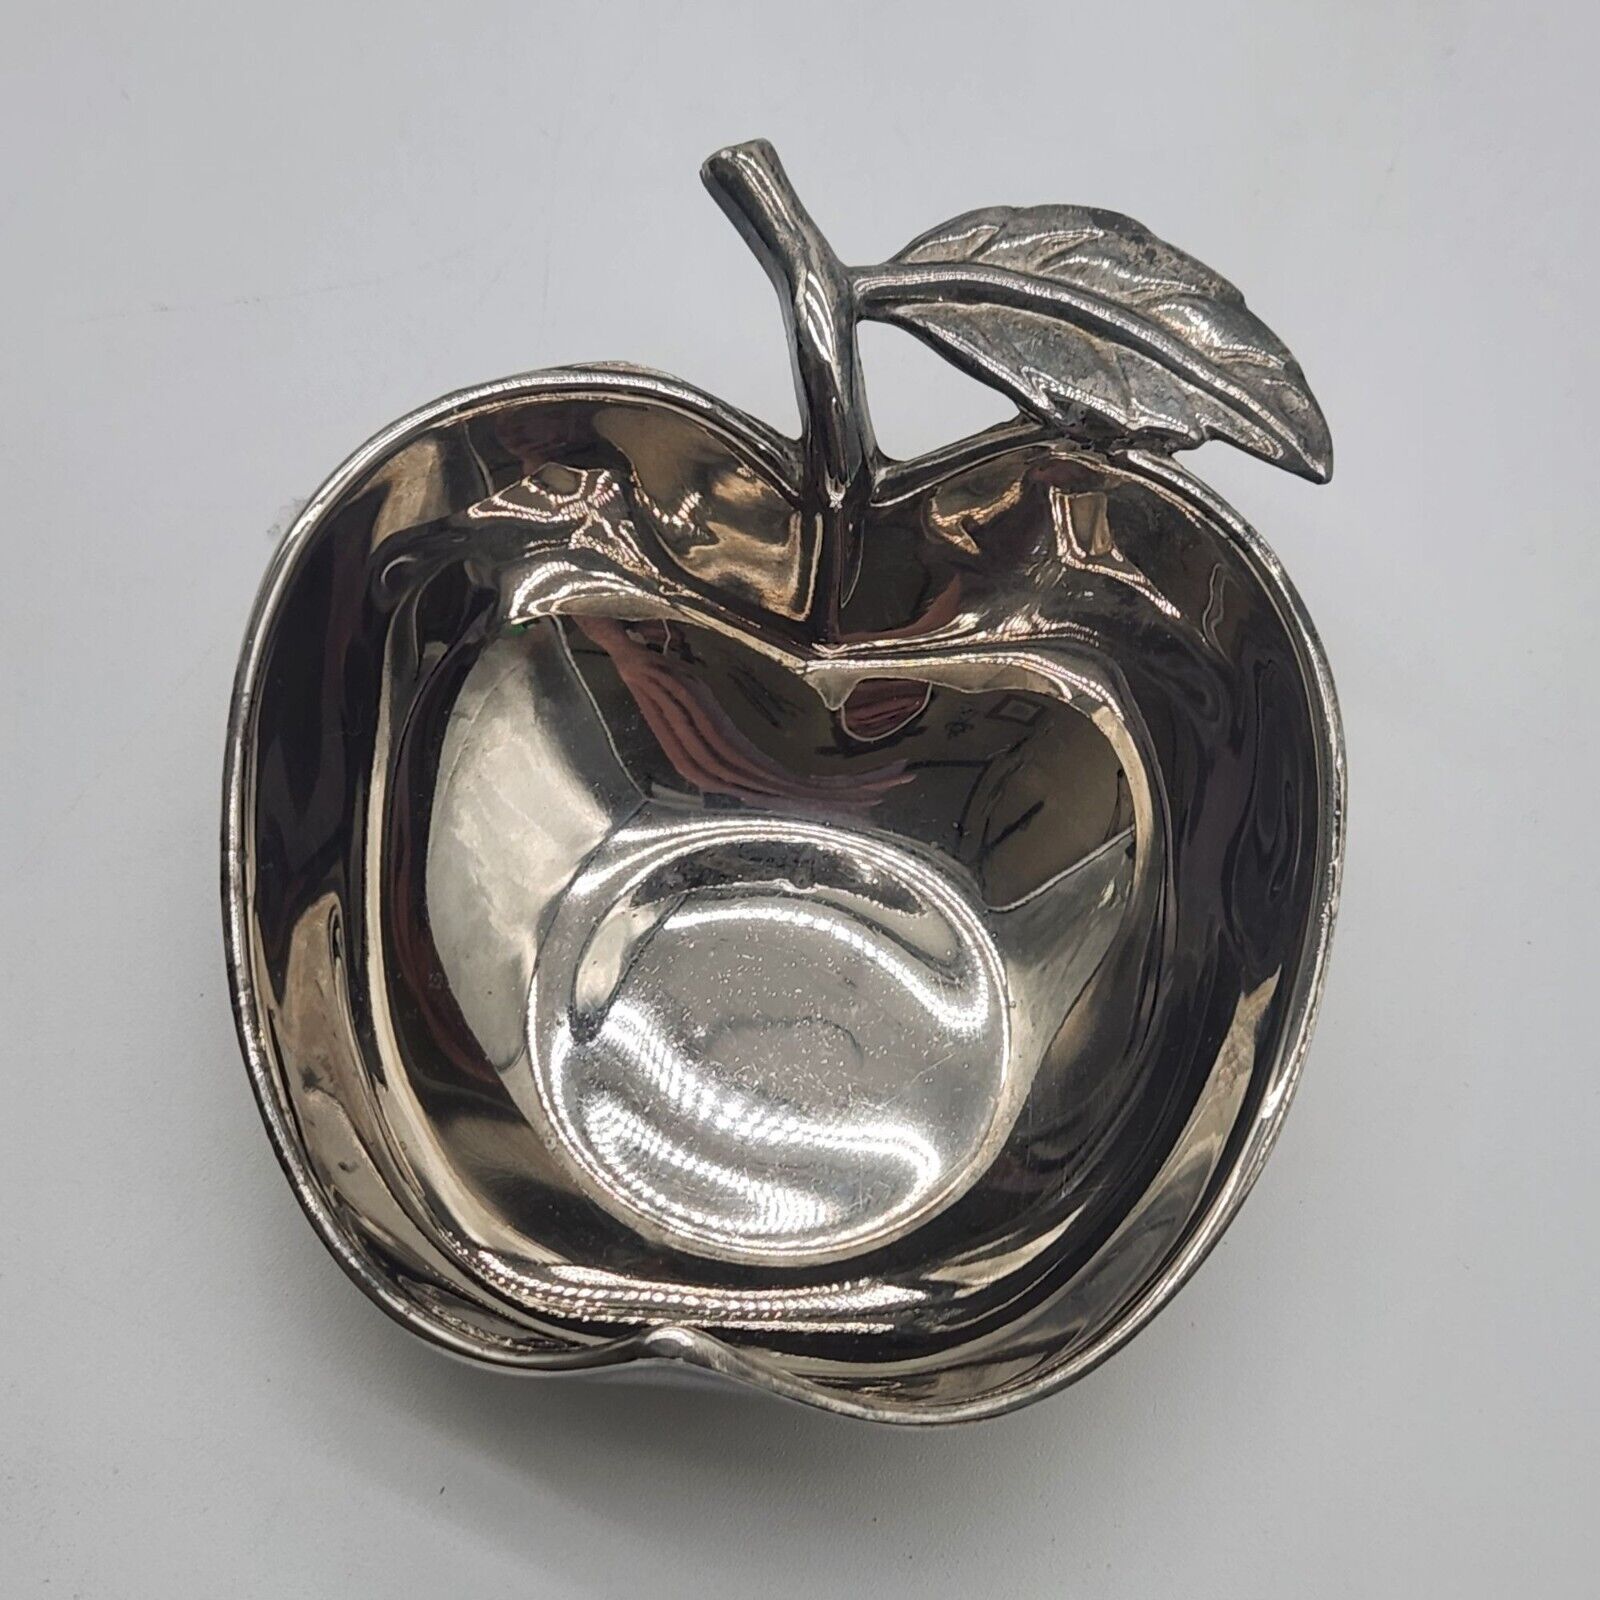 Vintage Silver Plate Apple Shaped Nuts Mints Candy Jewelry Trinket Dish Small